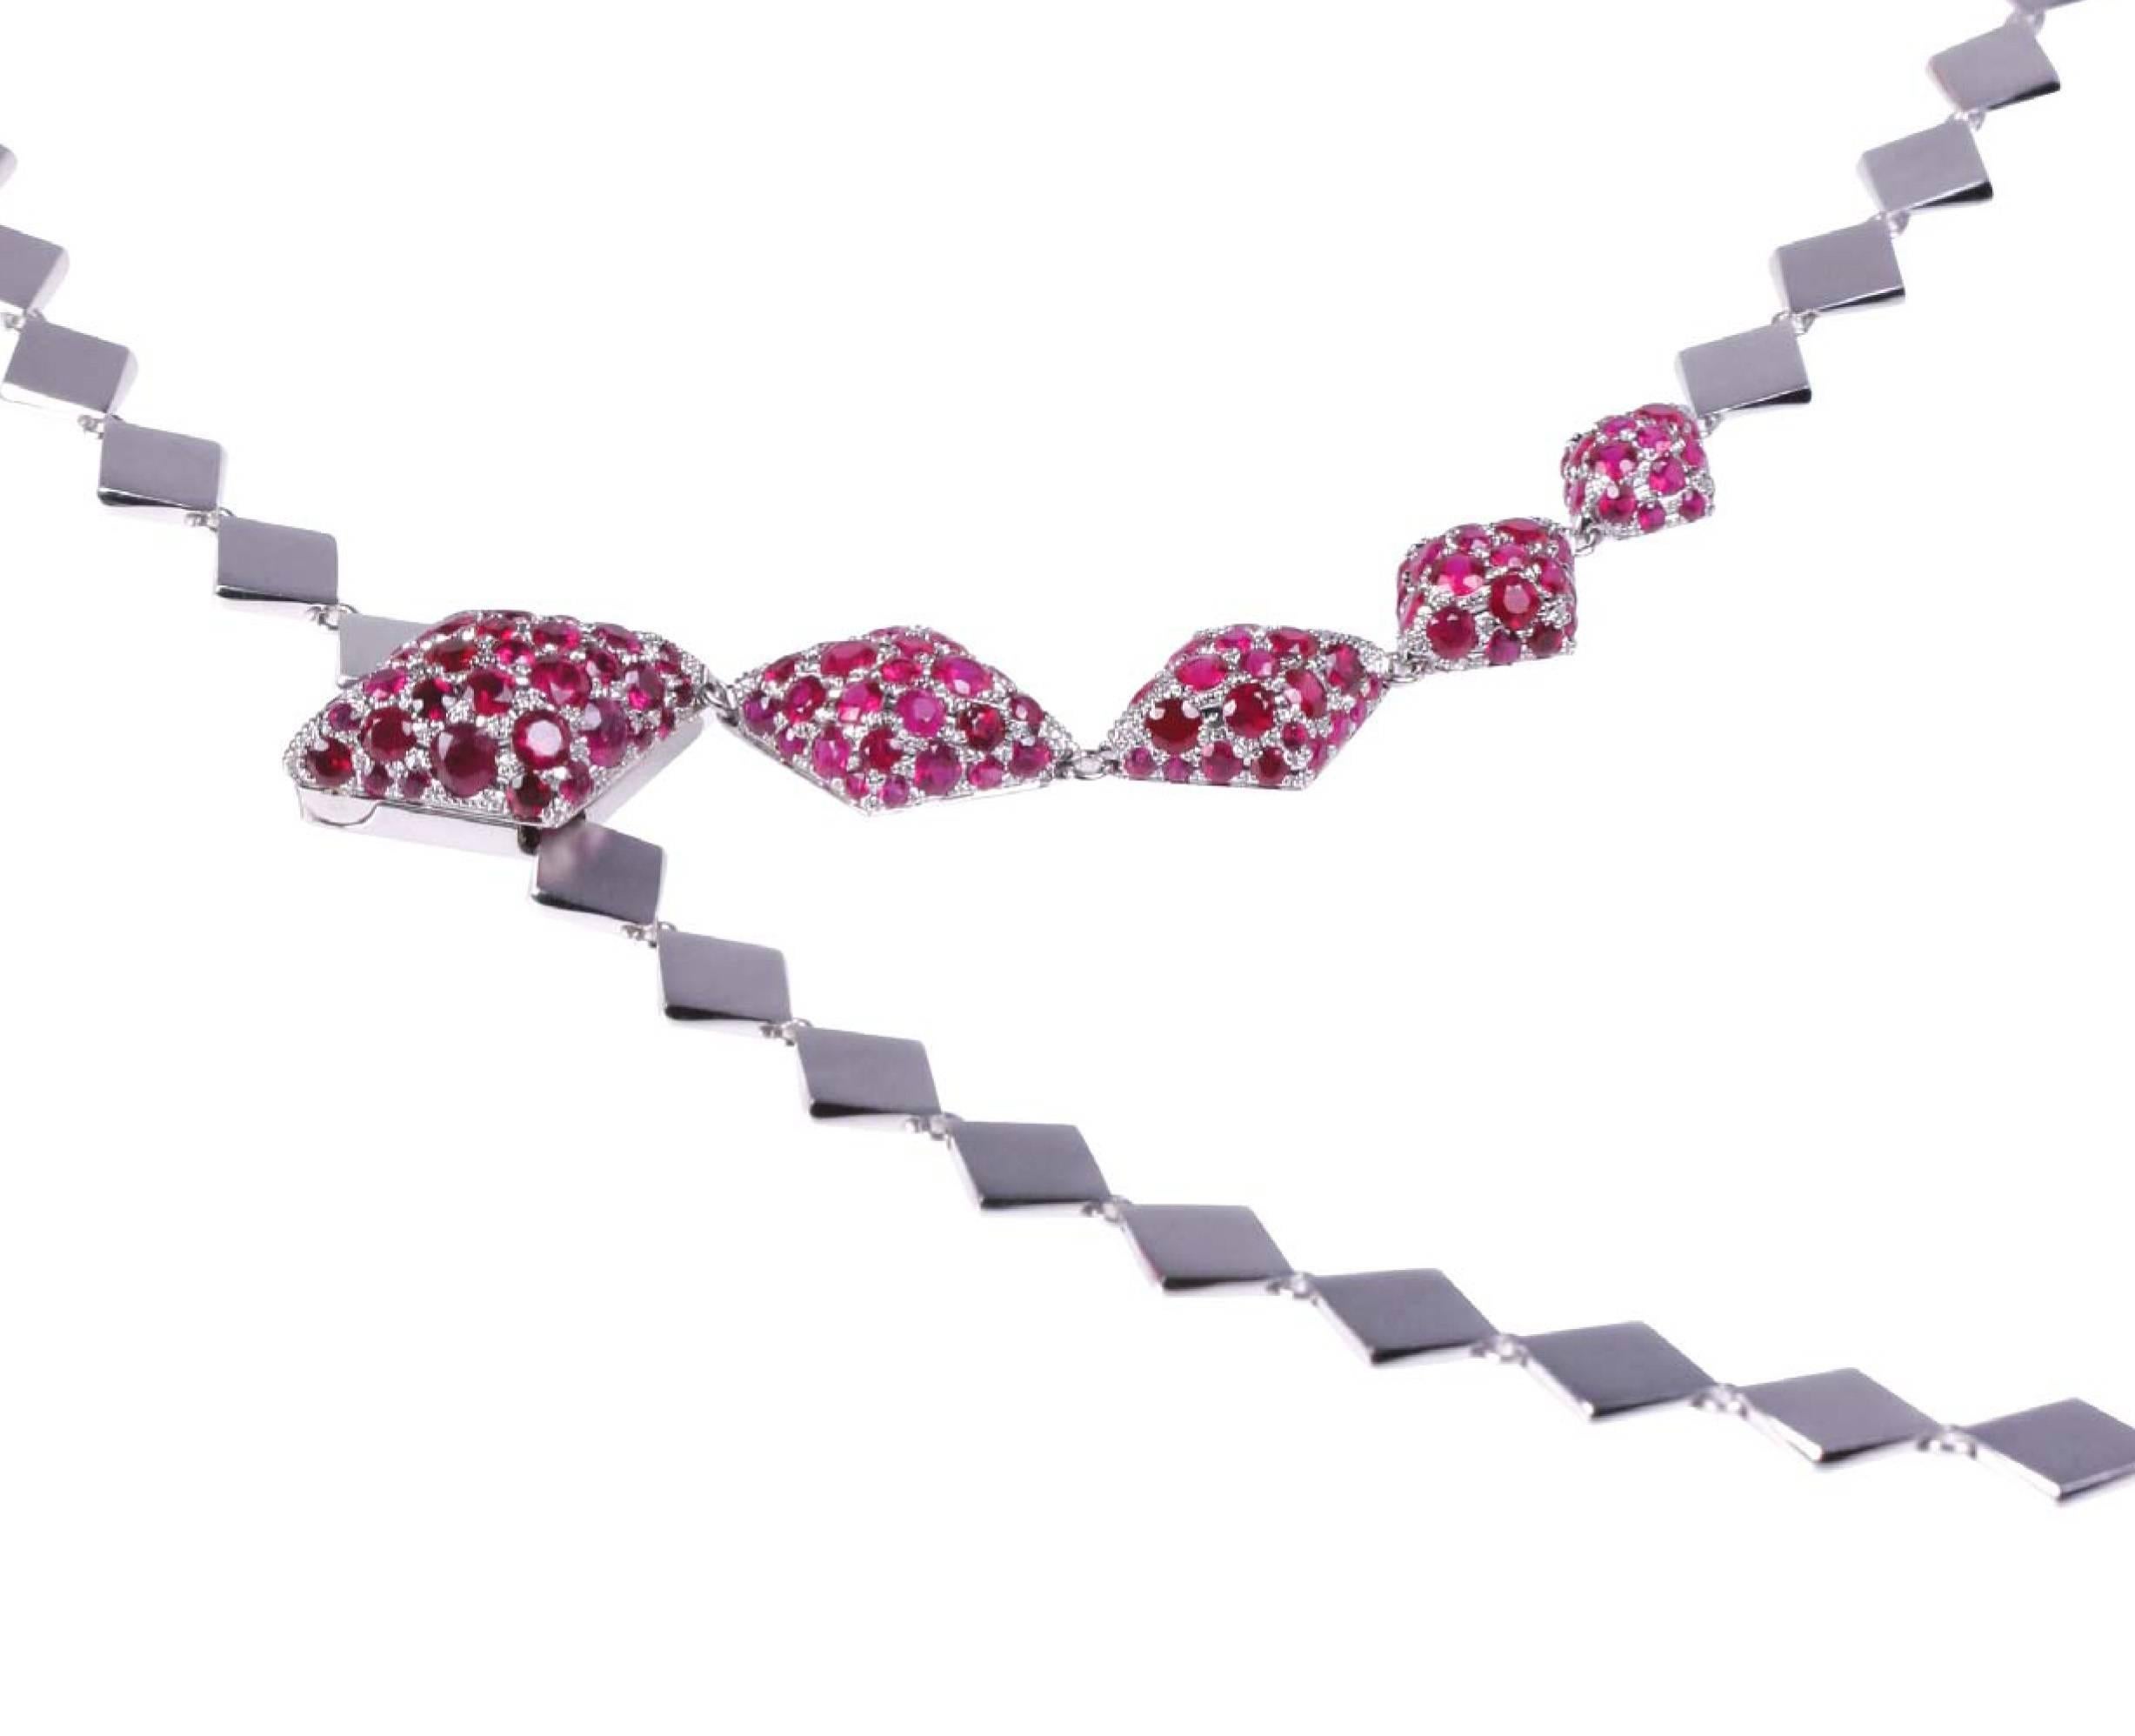 Metal: 18K White Gold
Precious Stones: Rubies (approximately 10cts)
Please allow for slight variations in measurements as pieces are handmade

Youmna's 18K white gold Harlequin Necklace set with approximately 10 carats of rubies match perfectly her